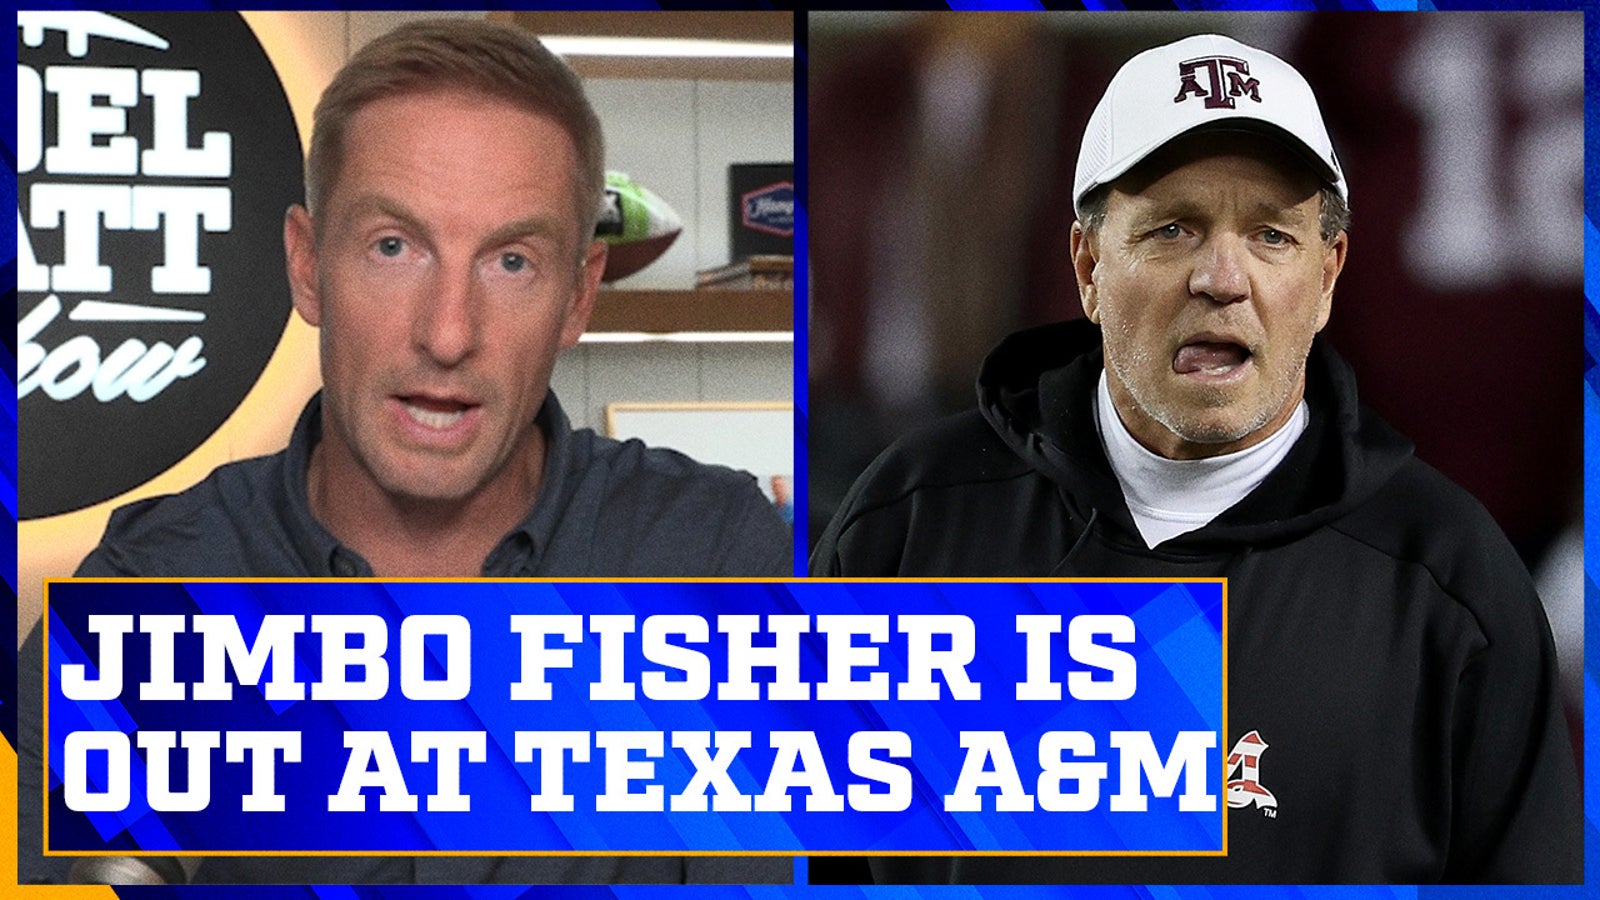 Texas A&M fires head coach Jimbo Fisher after their win over Mississippi State